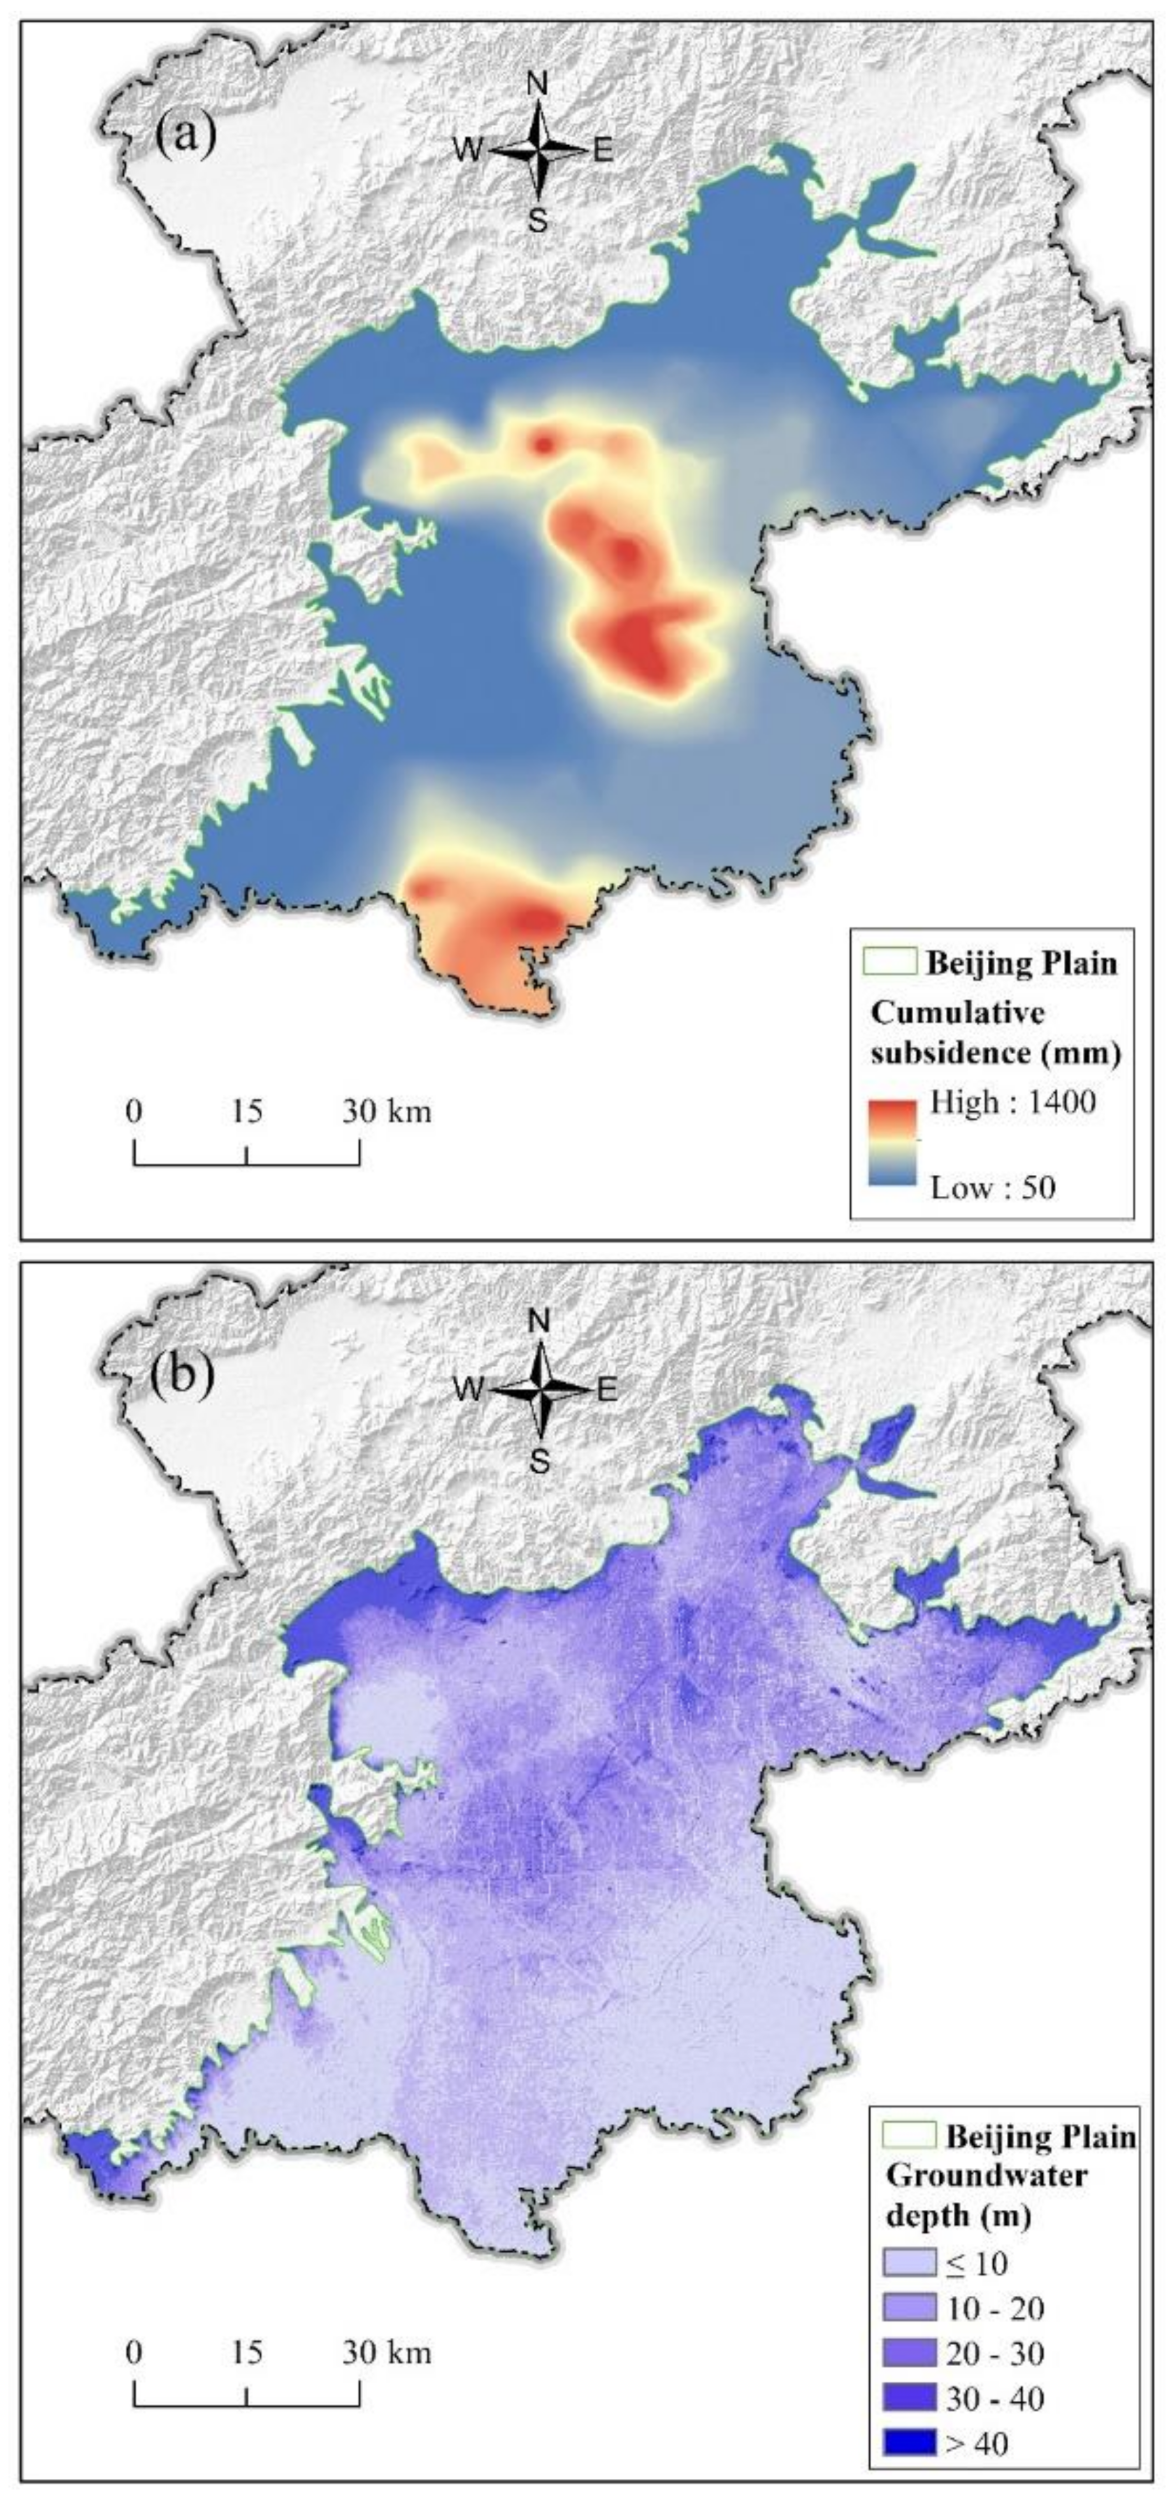 Remote Sensing Free Full Text Flood Risk Assessment Of Subway Systems In Metropolitan Areas Under Land Subsidence Scenario A Case Study Of Beijing Html